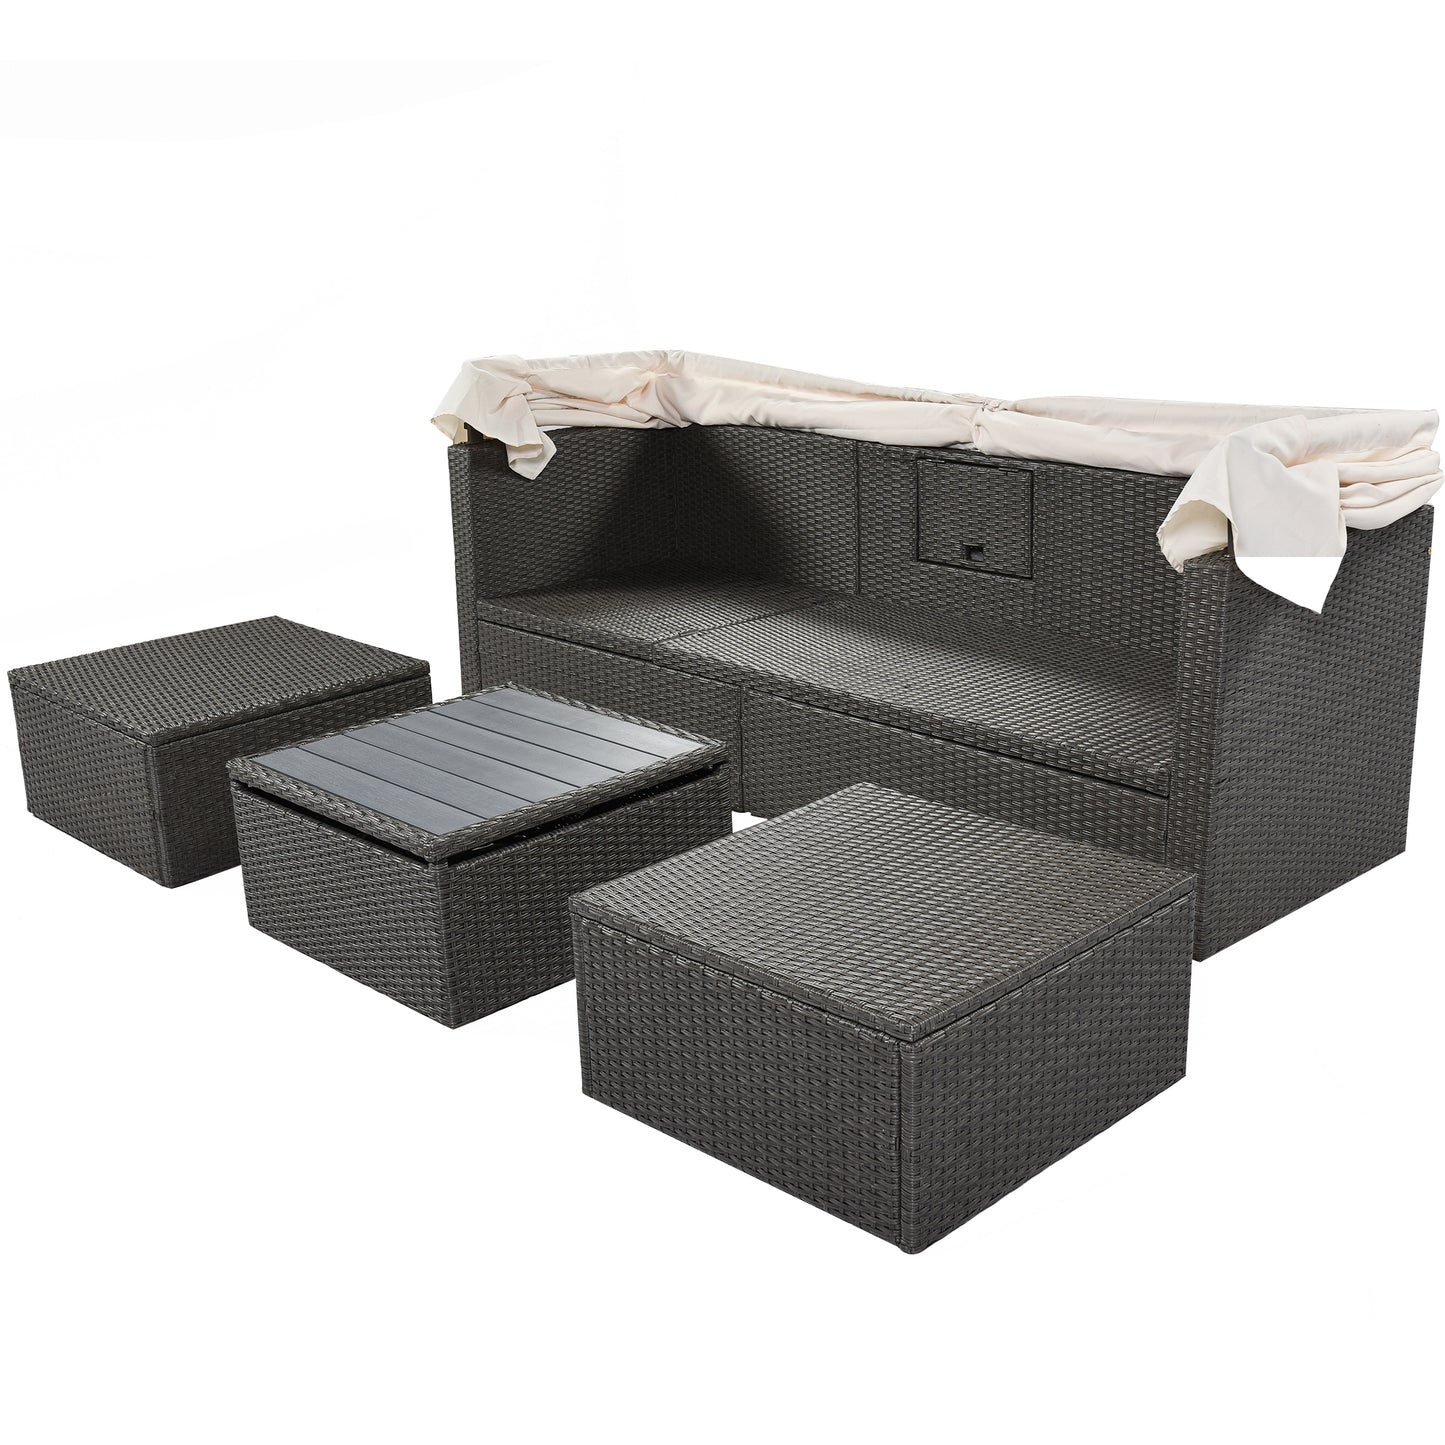 U_Style Outdoor Patio Rectangle Daybed with Retractable Canopy,  Wicker Furniture Sectional Seating with Washable Cushions, Backyard, Porch